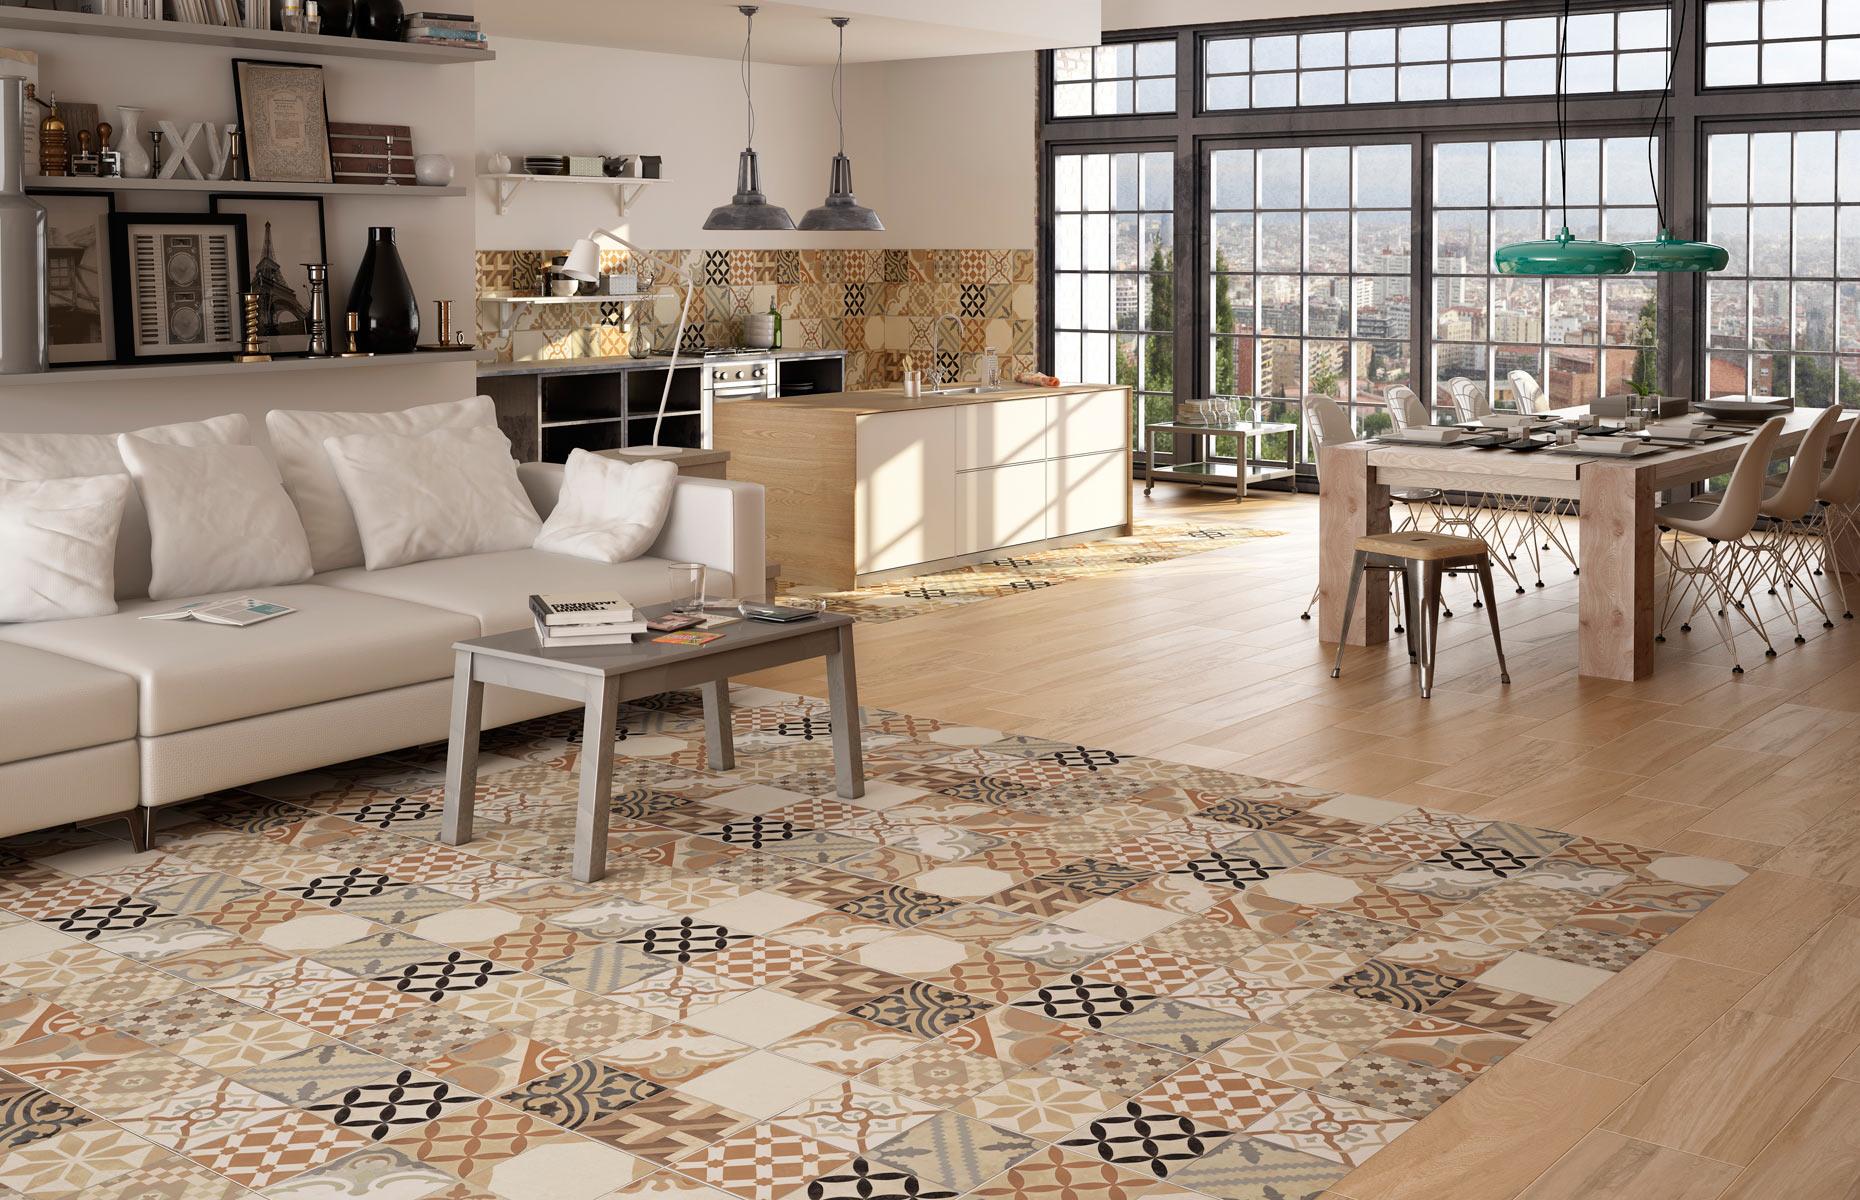 <p>A larger open-plan space allows you to <a href="http://www.loveproperty.com/gallerylist/70211/flooring-ideas">be more creative with your flooring options</a>. It's possible to mix and match different types of flooring to help separate living zones, as long as the flooring types complement each other and create a cohesive flow. Here, porcelain tiles have been used in the kitchen area, blending into warm wood floors elsewhere. The patchwork-effect floor is then repeated in the central space to define the living area. </p>